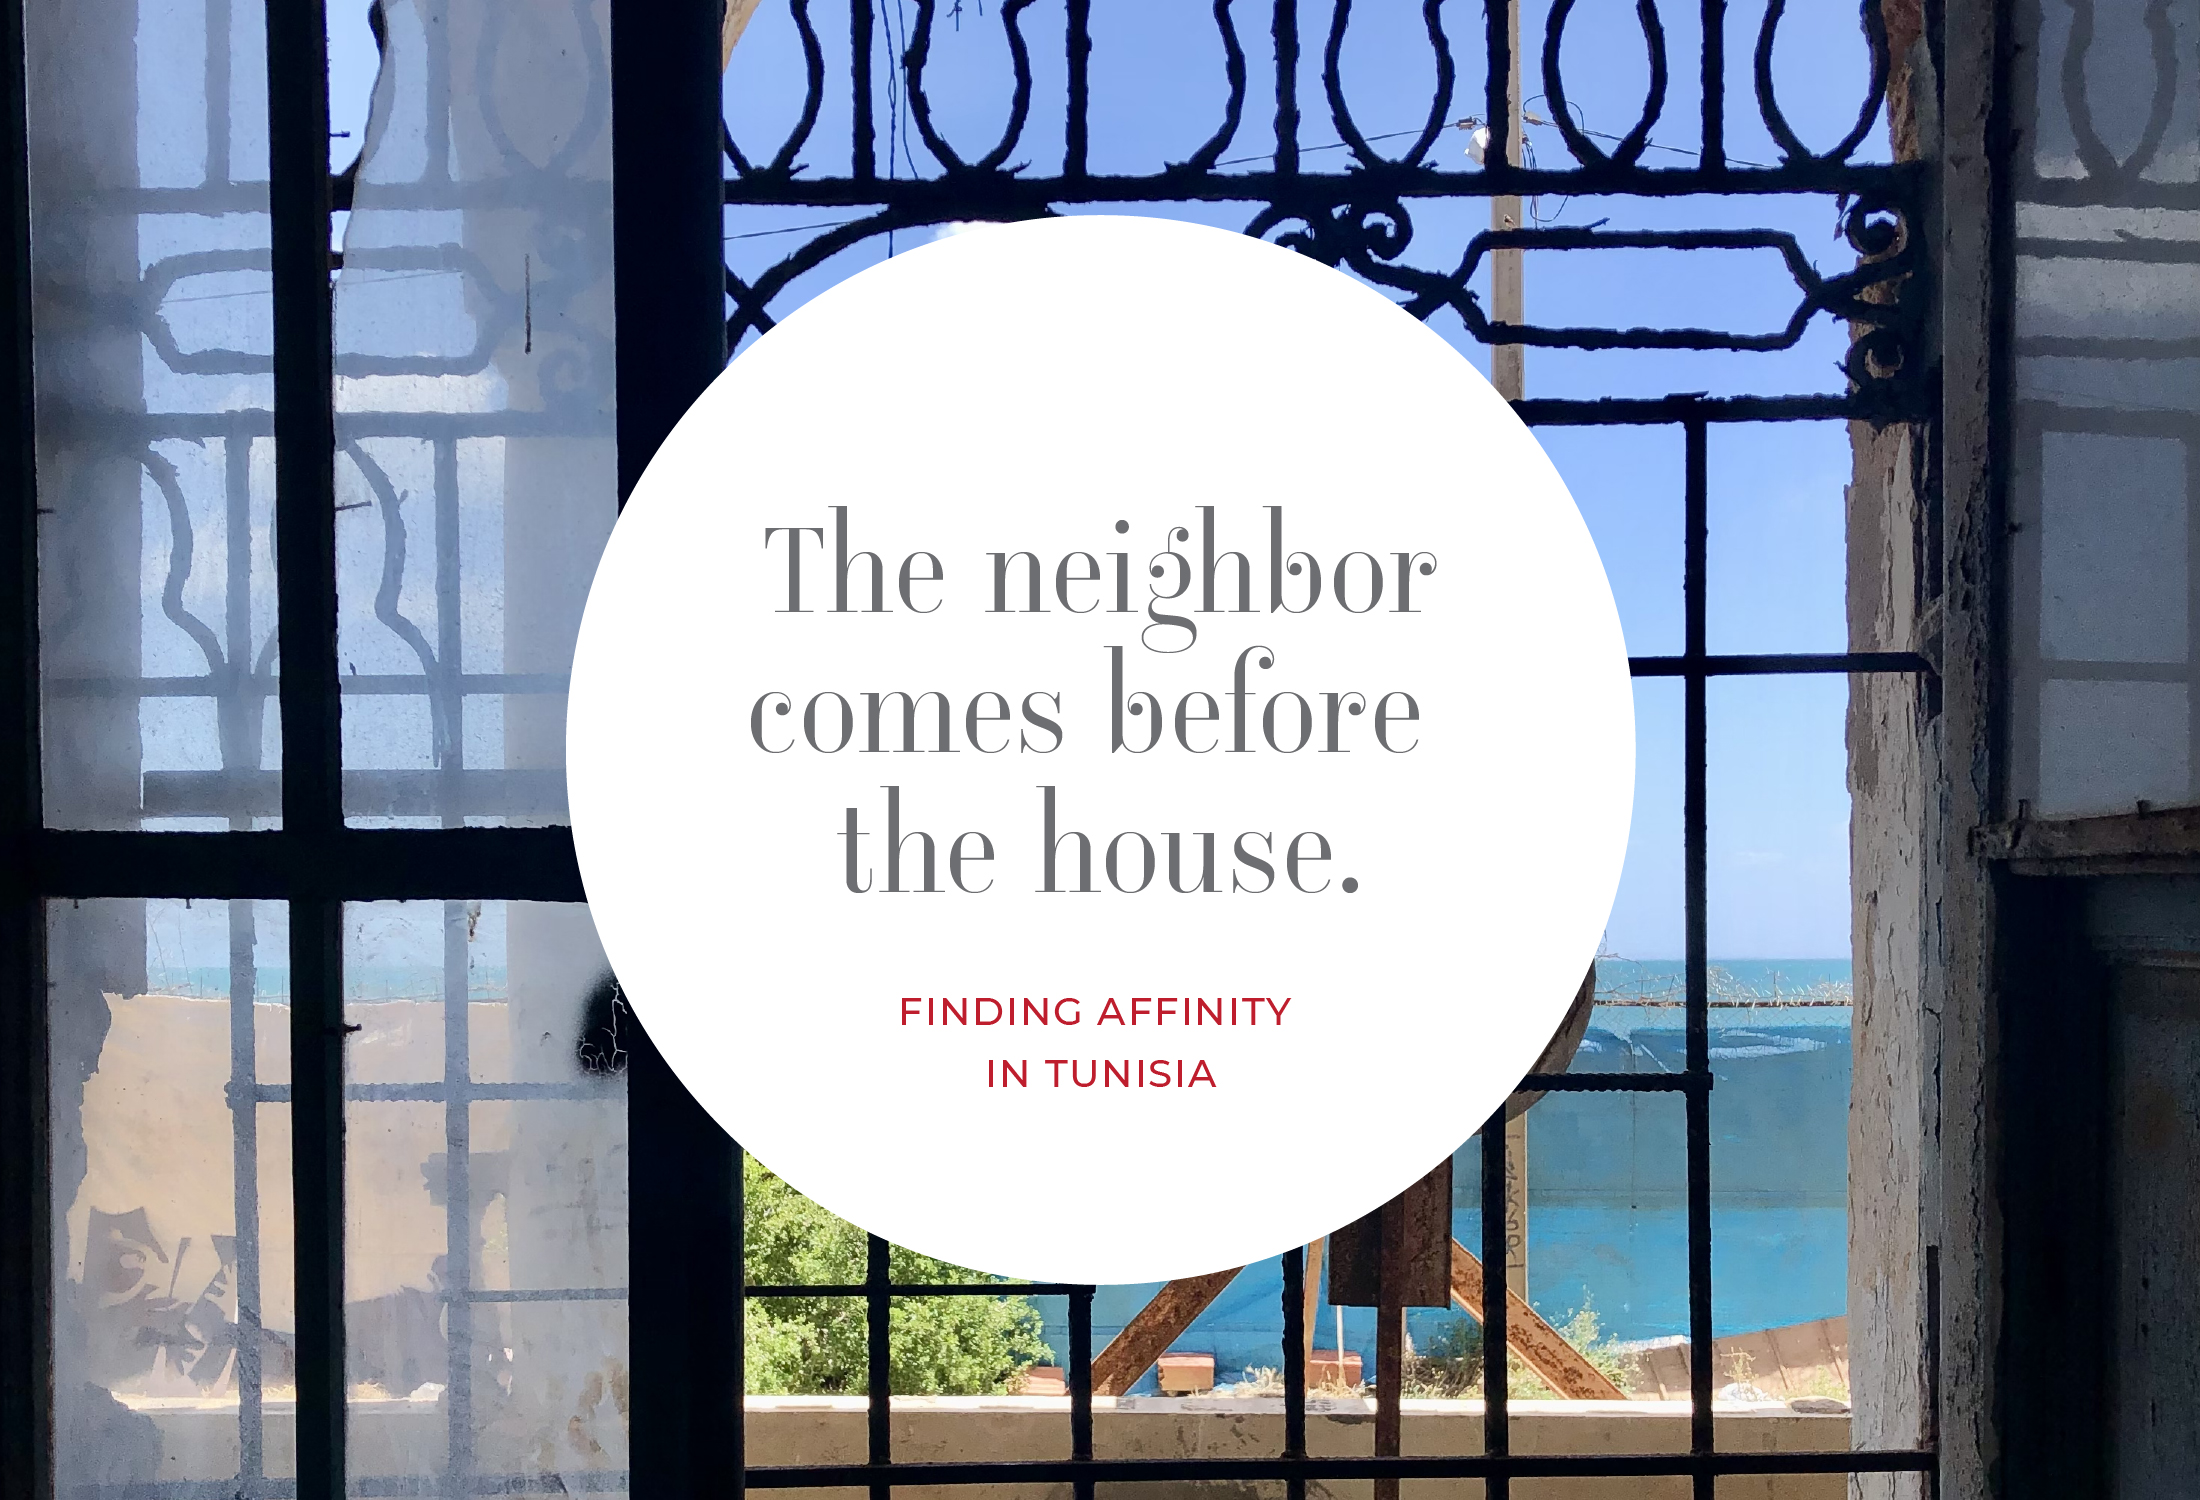 The neighbor comes before the house: finding affinity in Tunisia